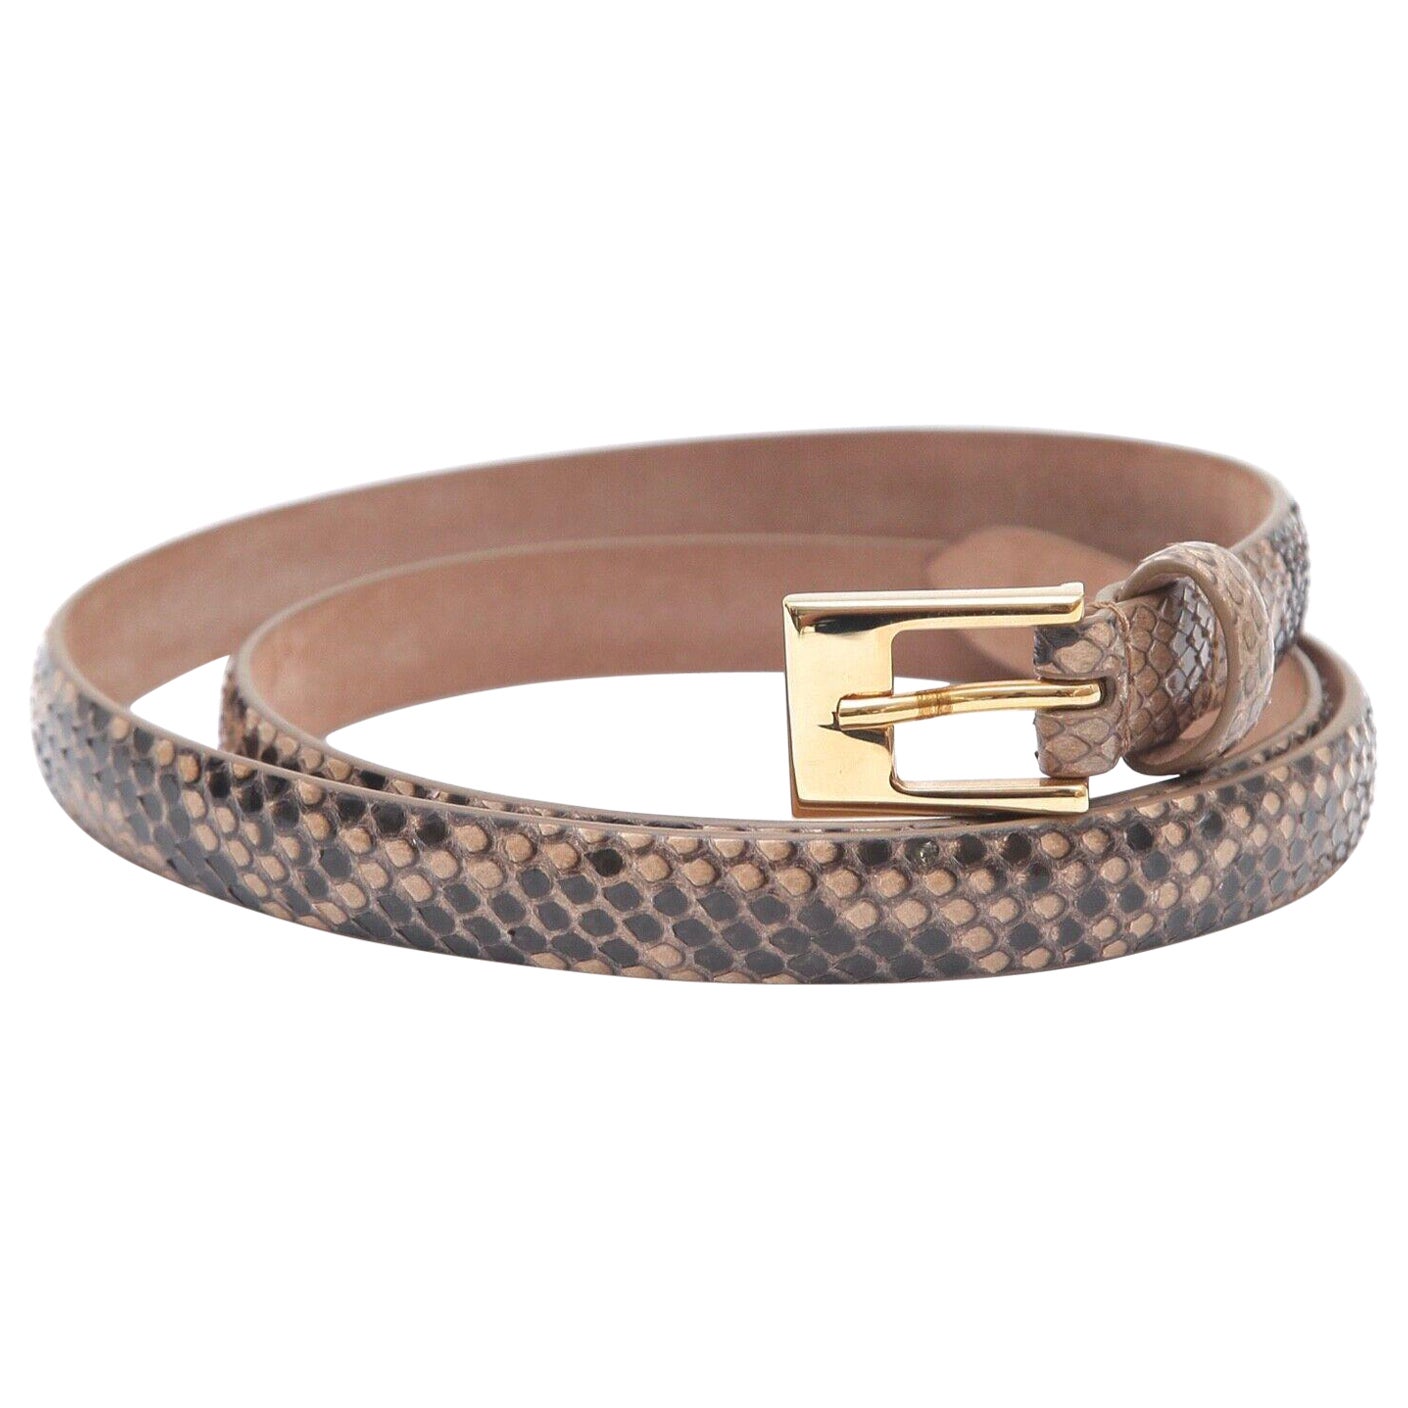 MICHAEL KORS Thin Skinny BELT Exotic Leather Brown Gold HW Buckle S